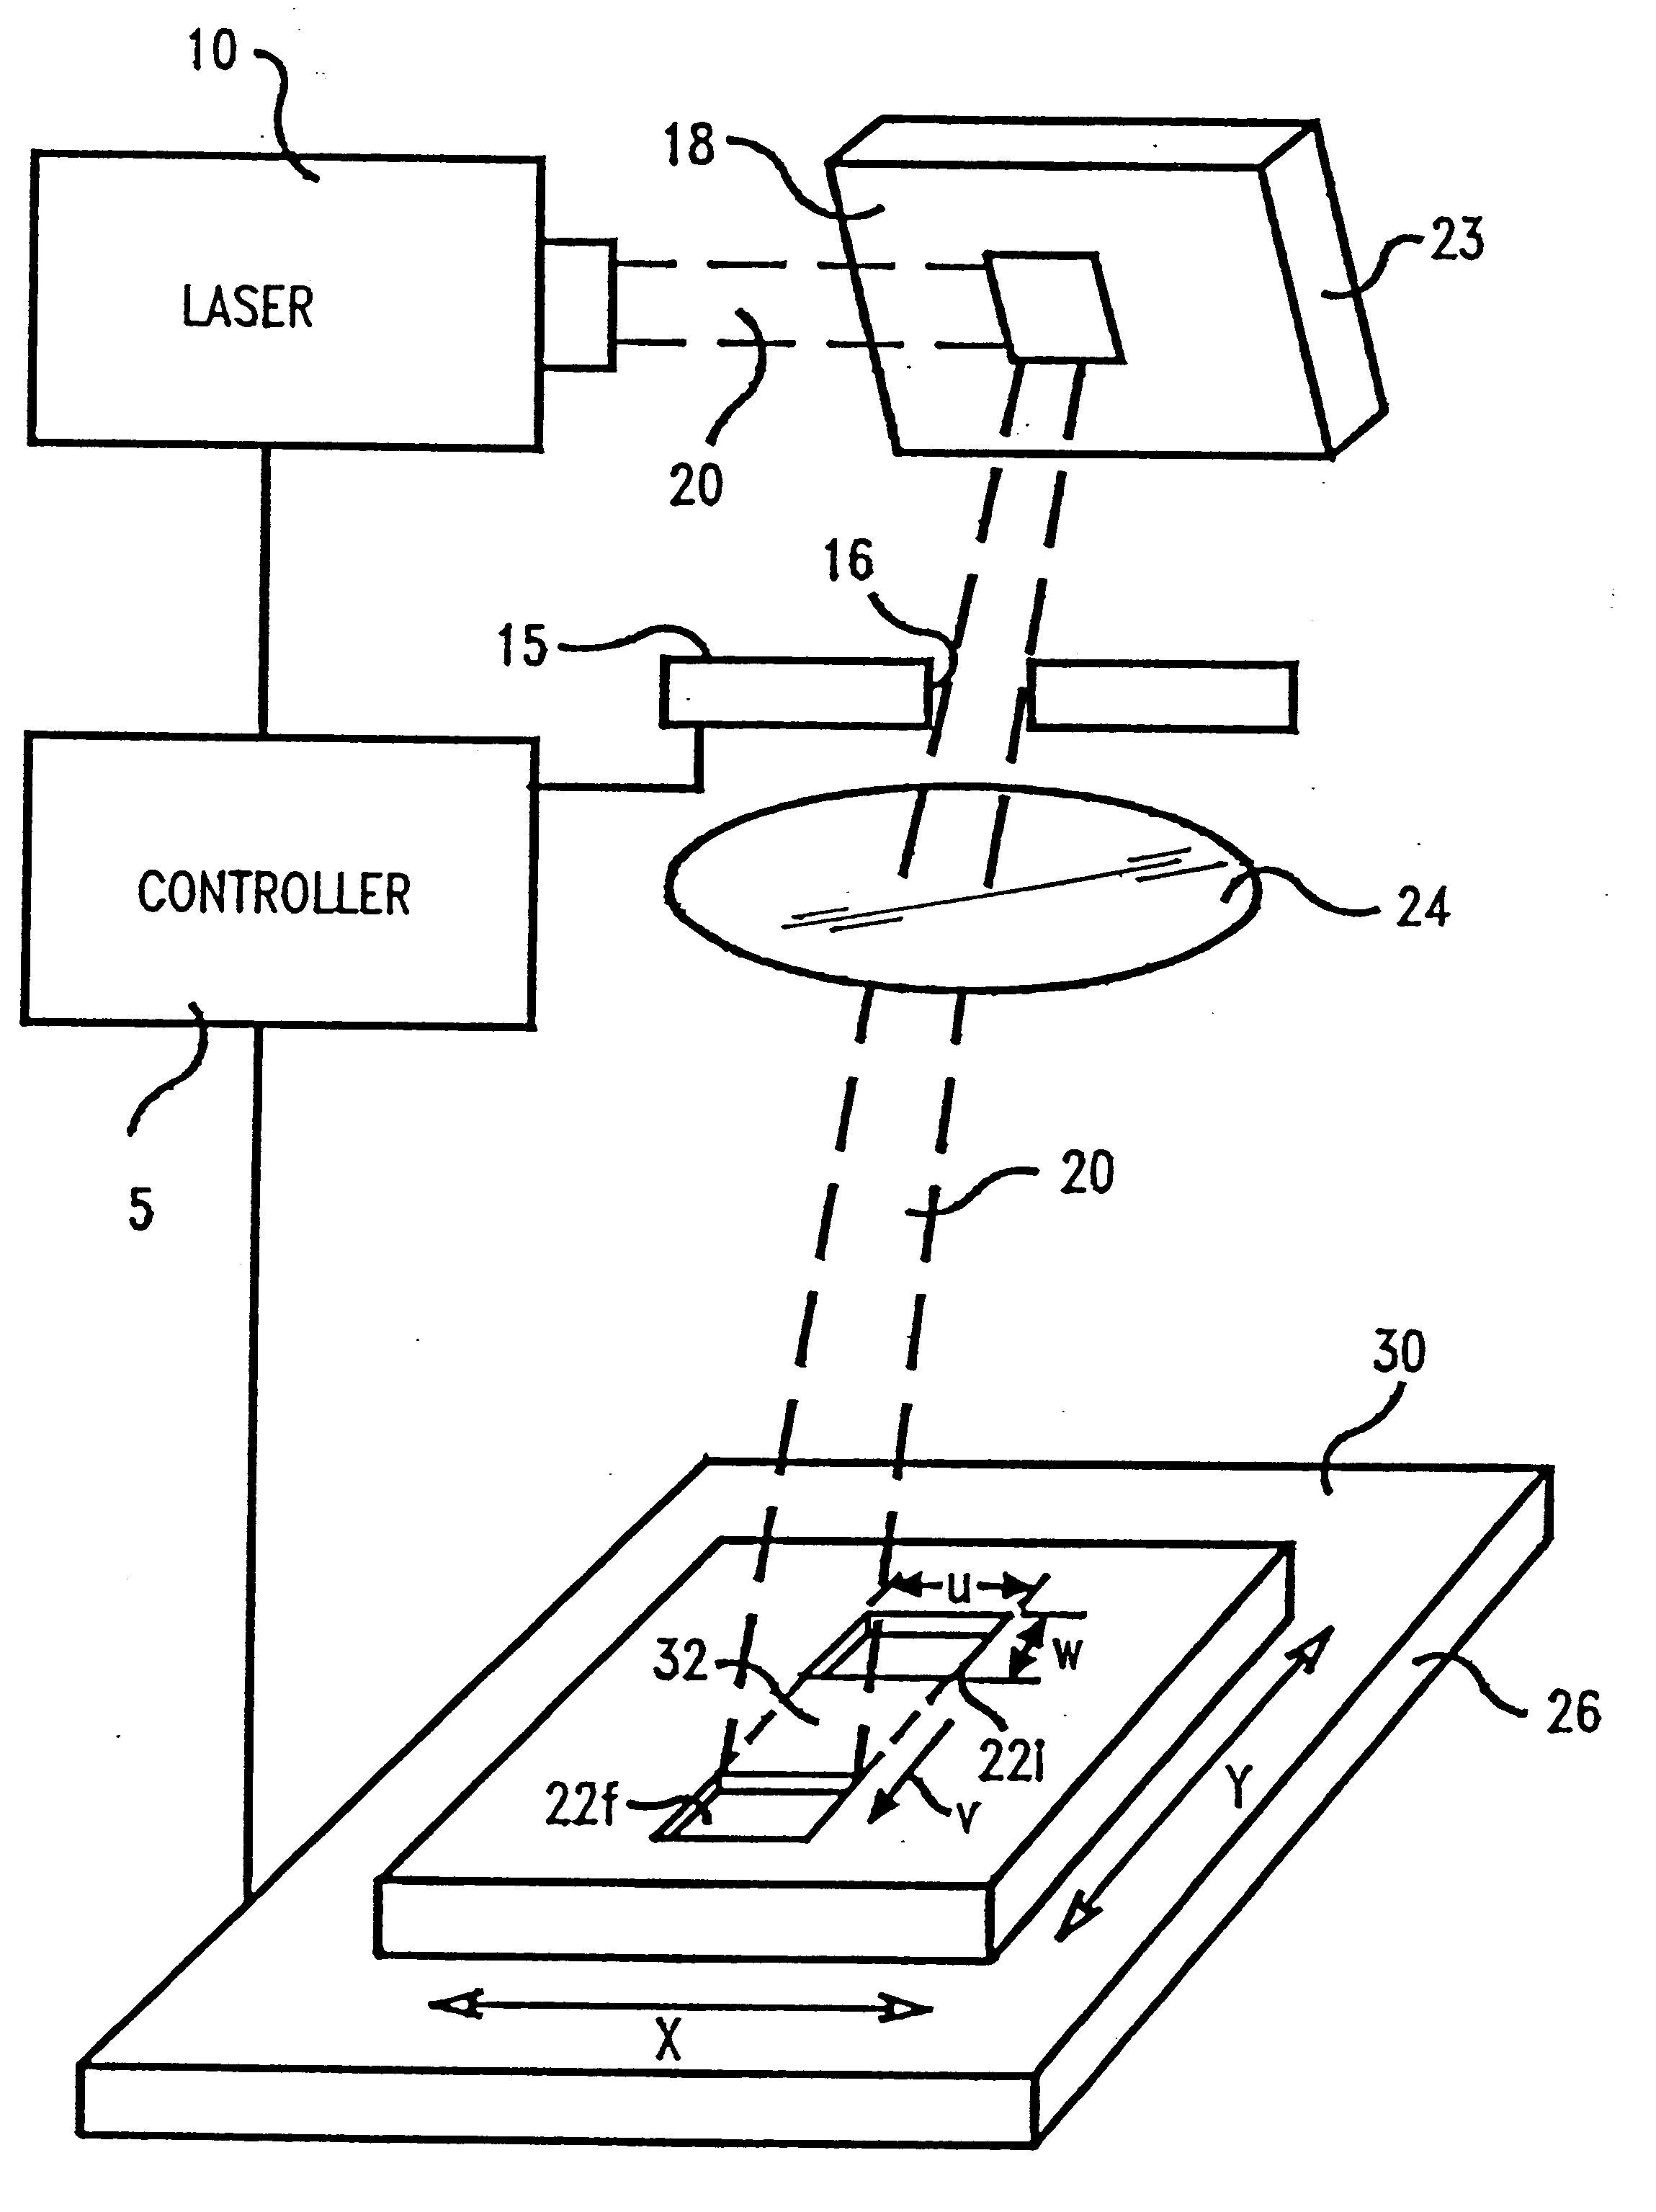 Method for creation of inclined microstructures using a scanned laser image